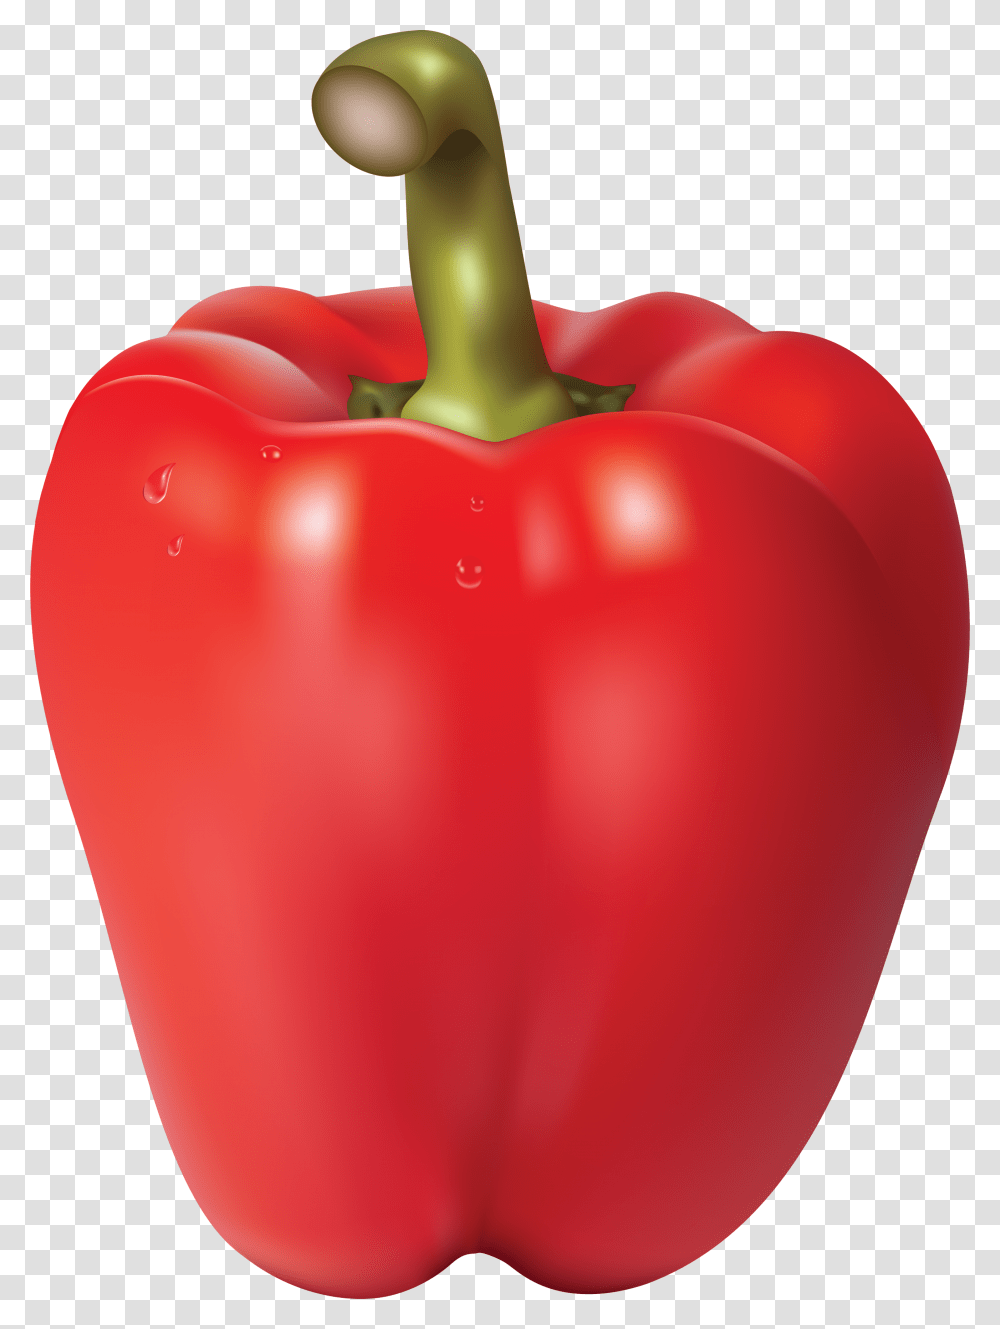 Bell Pepper Chili Pepper Red Pepper Background, Plant, Balloon, Vegetable, Food Transparent Png